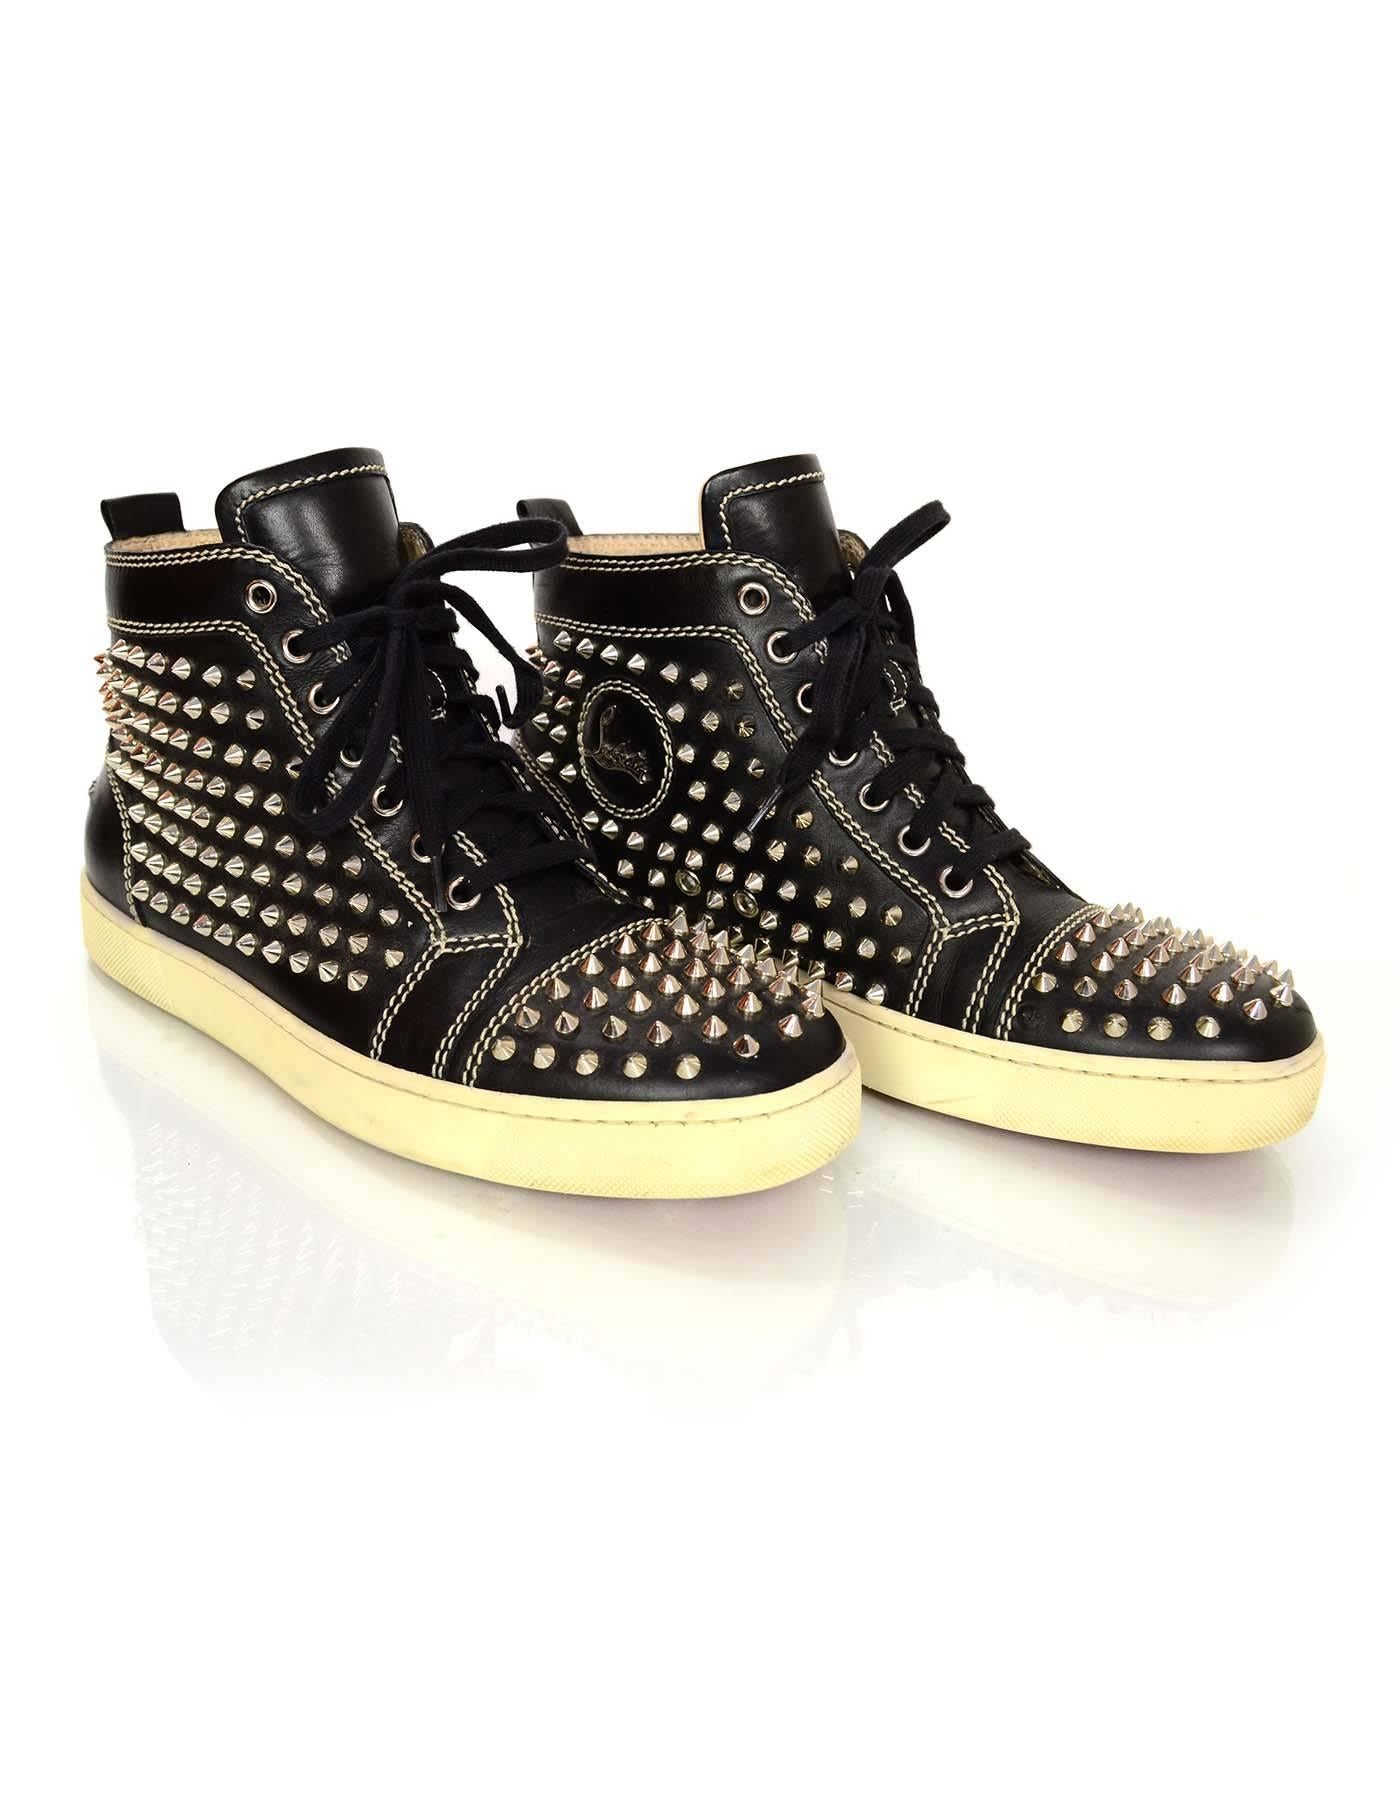 Women's Christian Louboutin Black Leather Louis Spike High-top Studded Sneakers Sz 41